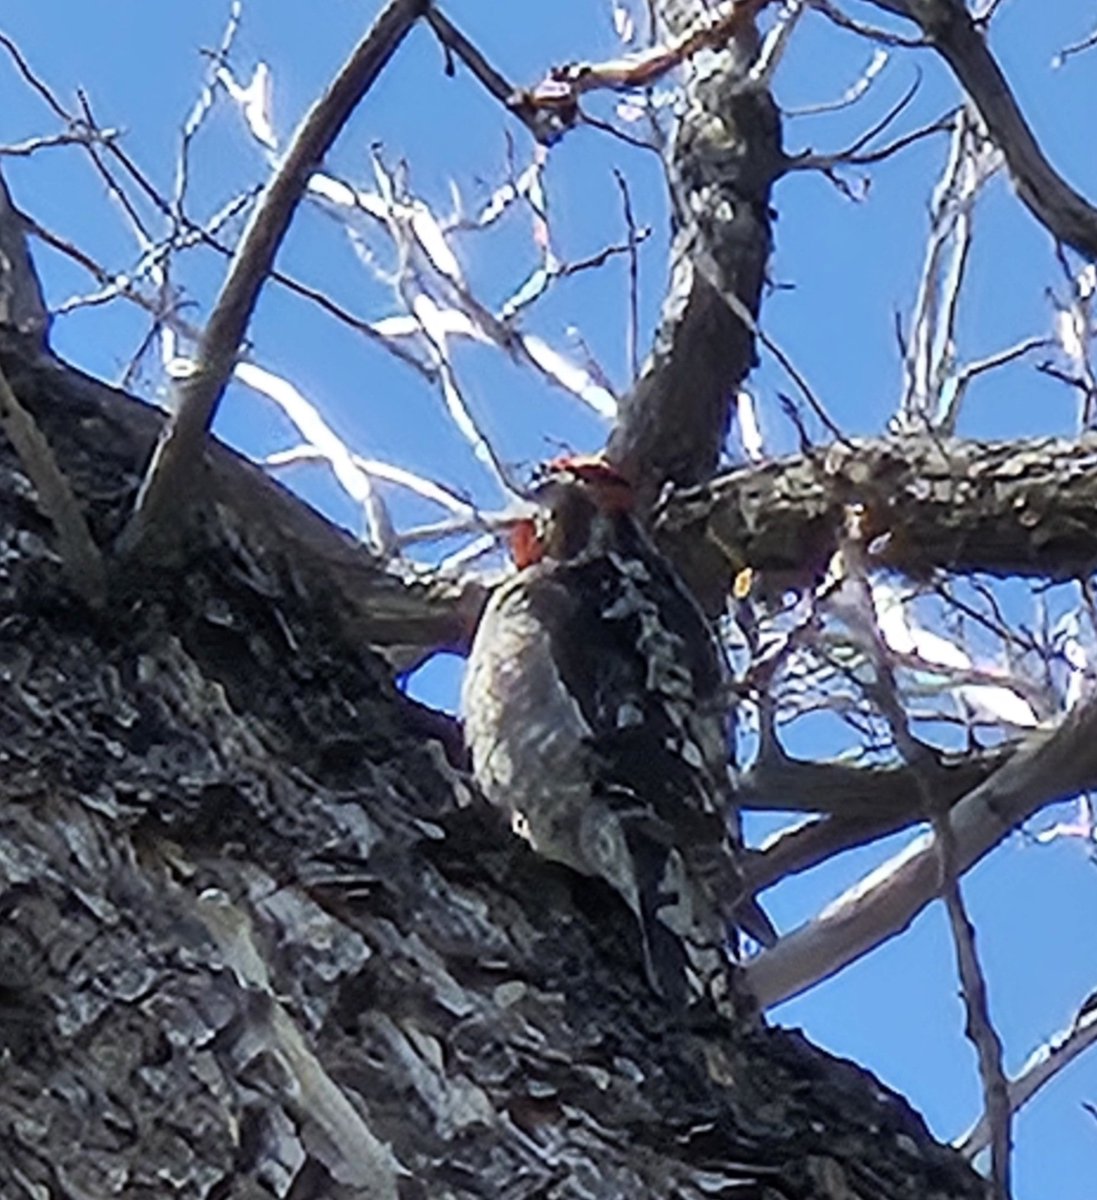 As of someone gently rapping, rapping at my chamber door ...
Tis some visitor, I discovered, rapping outside my chamber door ....
In a tall tree, a sweet little woodpecker tap, tap, tapping galore ...
This is it & nothing more ... 🌲👀🥰
#BackyardBliss 💗